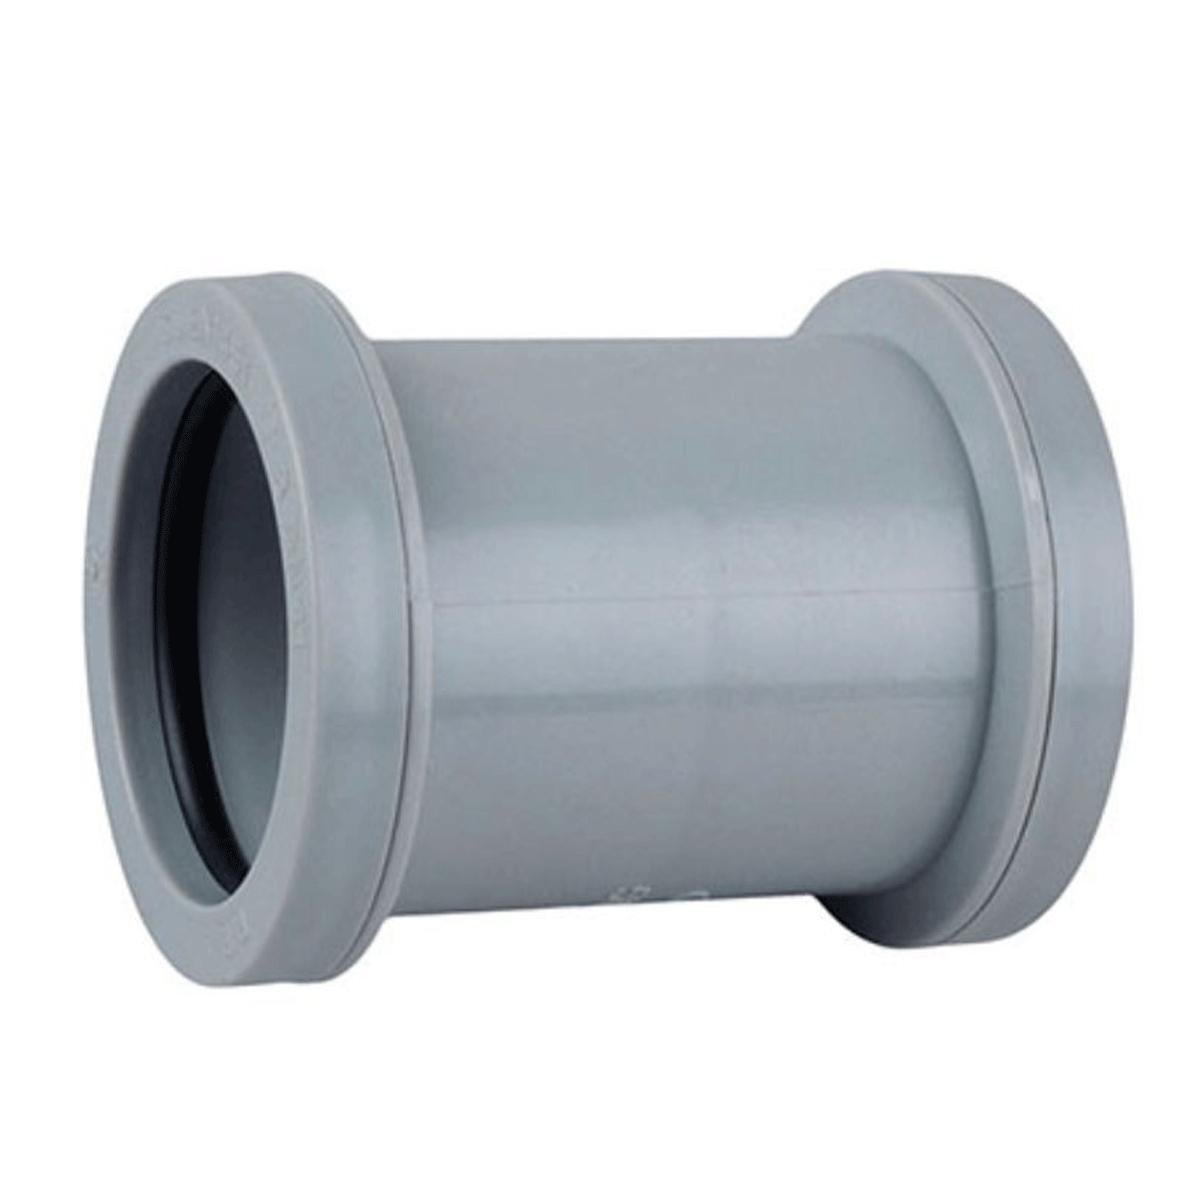 Waste Pipes & Fittings